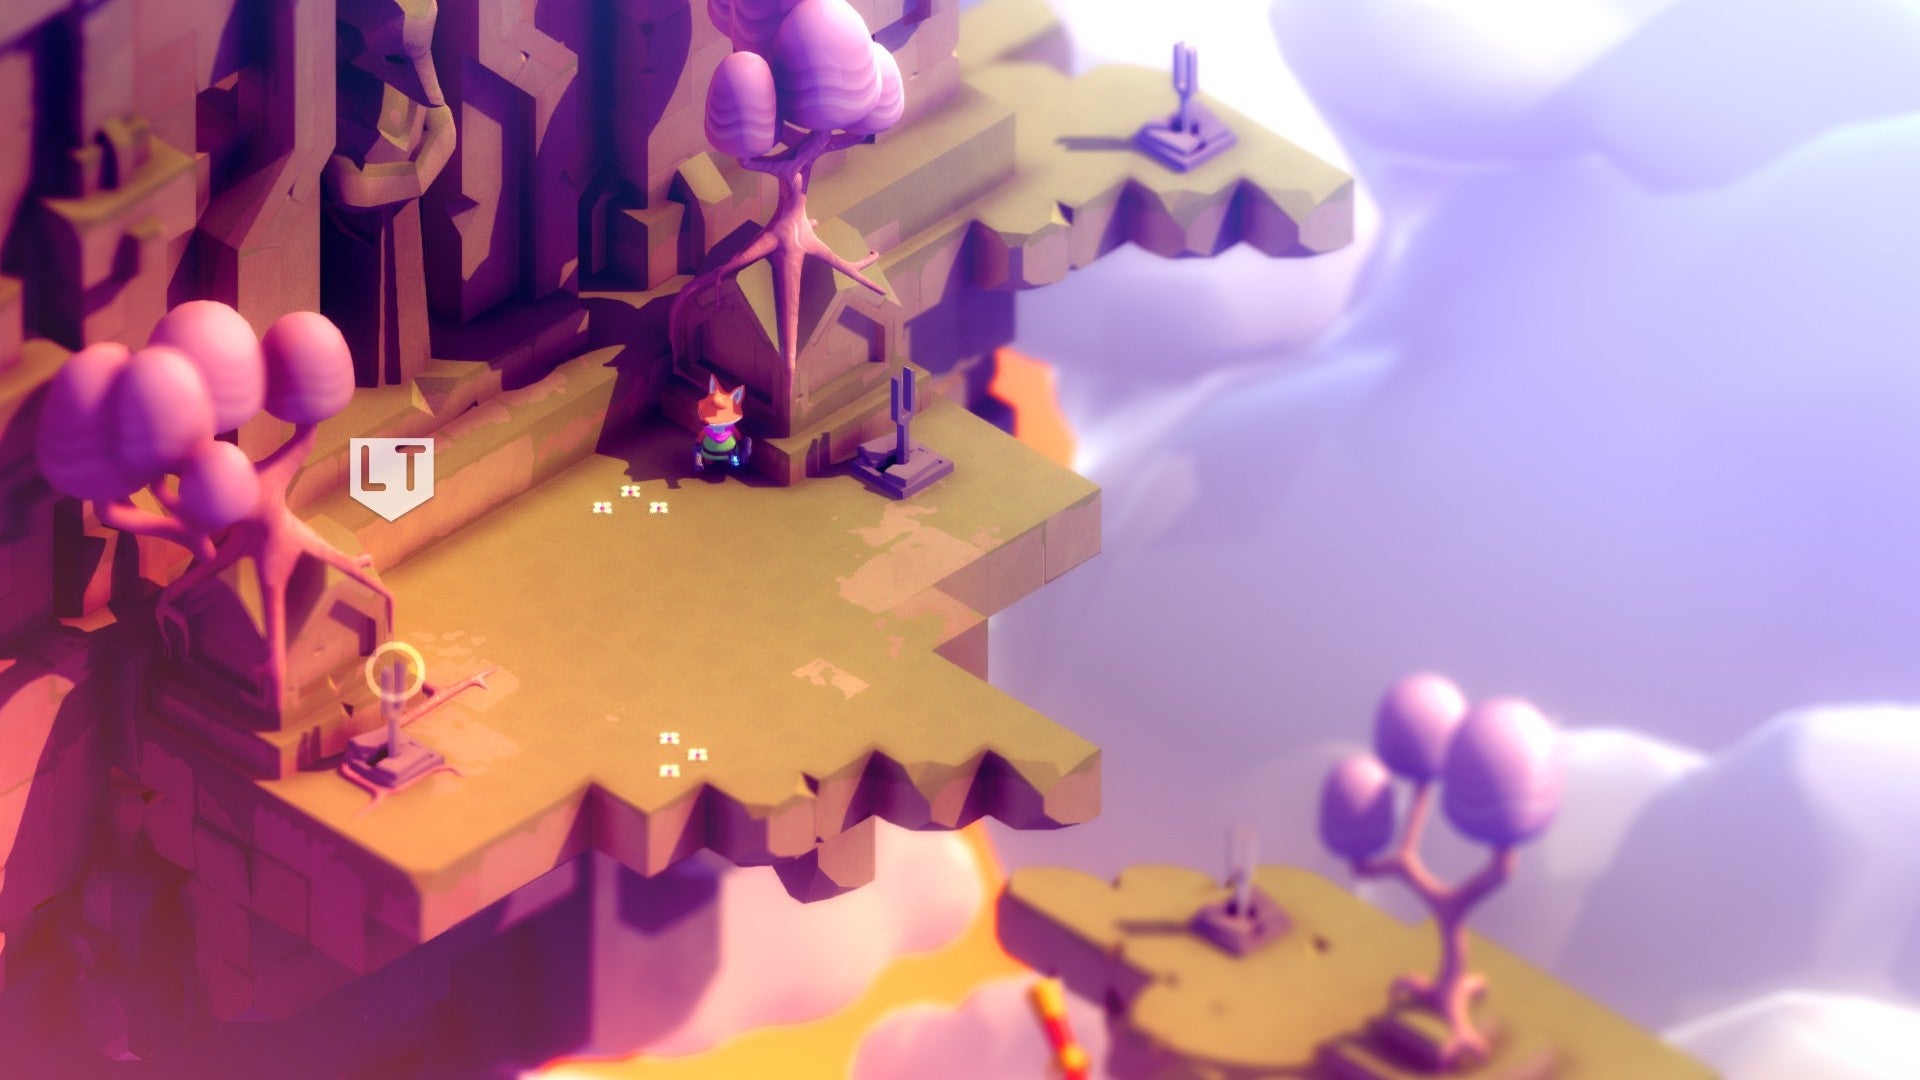 Tunic fox stood on a plateau in the sky, looking at a nearby grappling hook. Large fox statue looms over the protagonist and some blossom trees